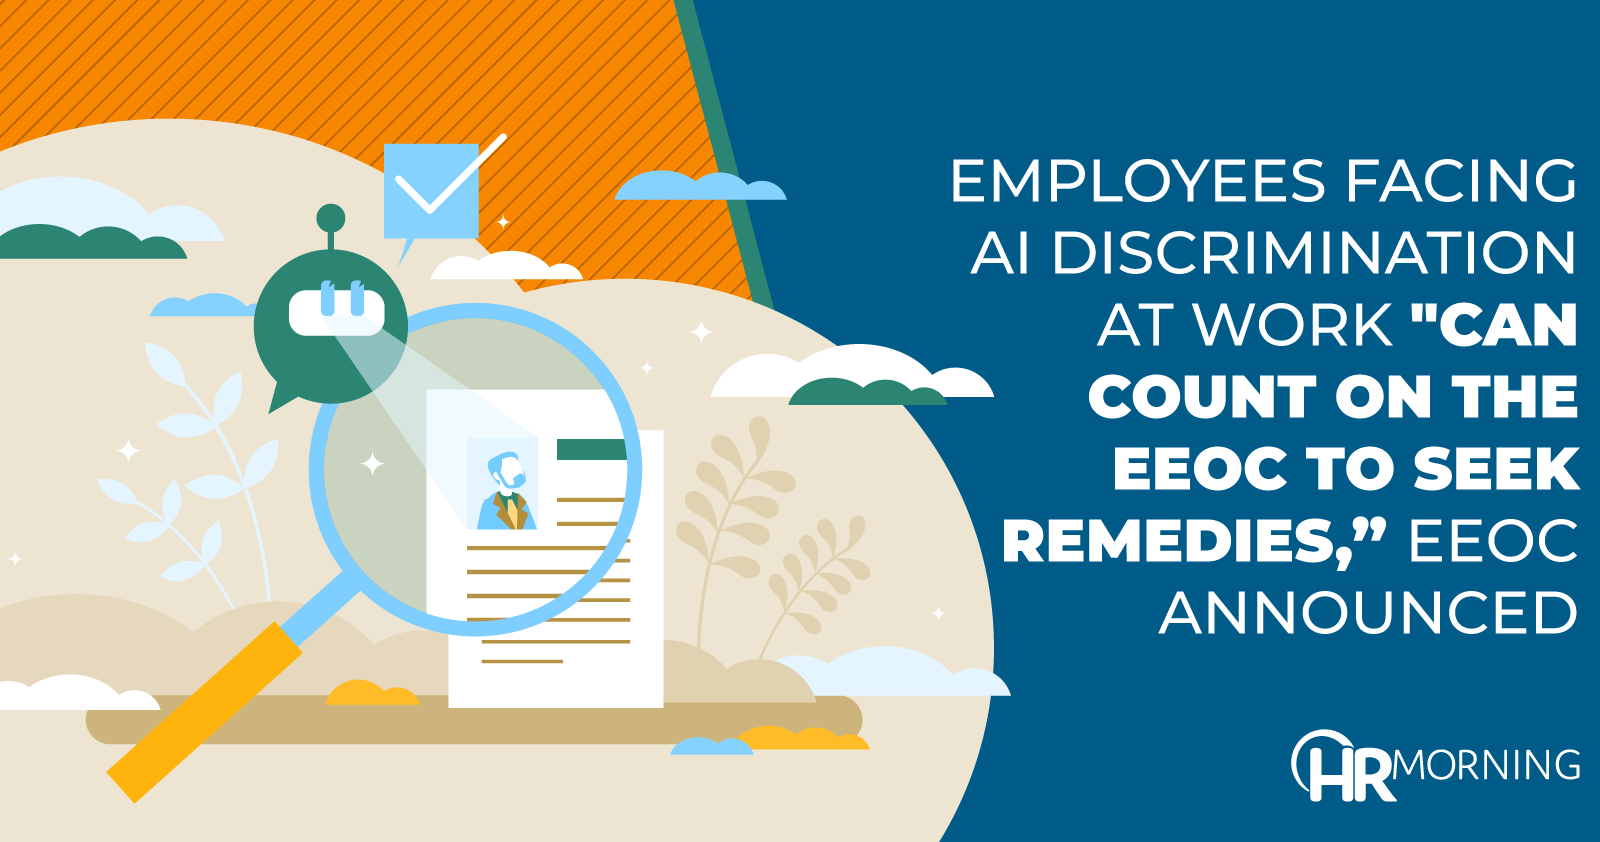 Workers facing AI discrimination at work "can count on the EEOC to seek remedies,” EEOC announced